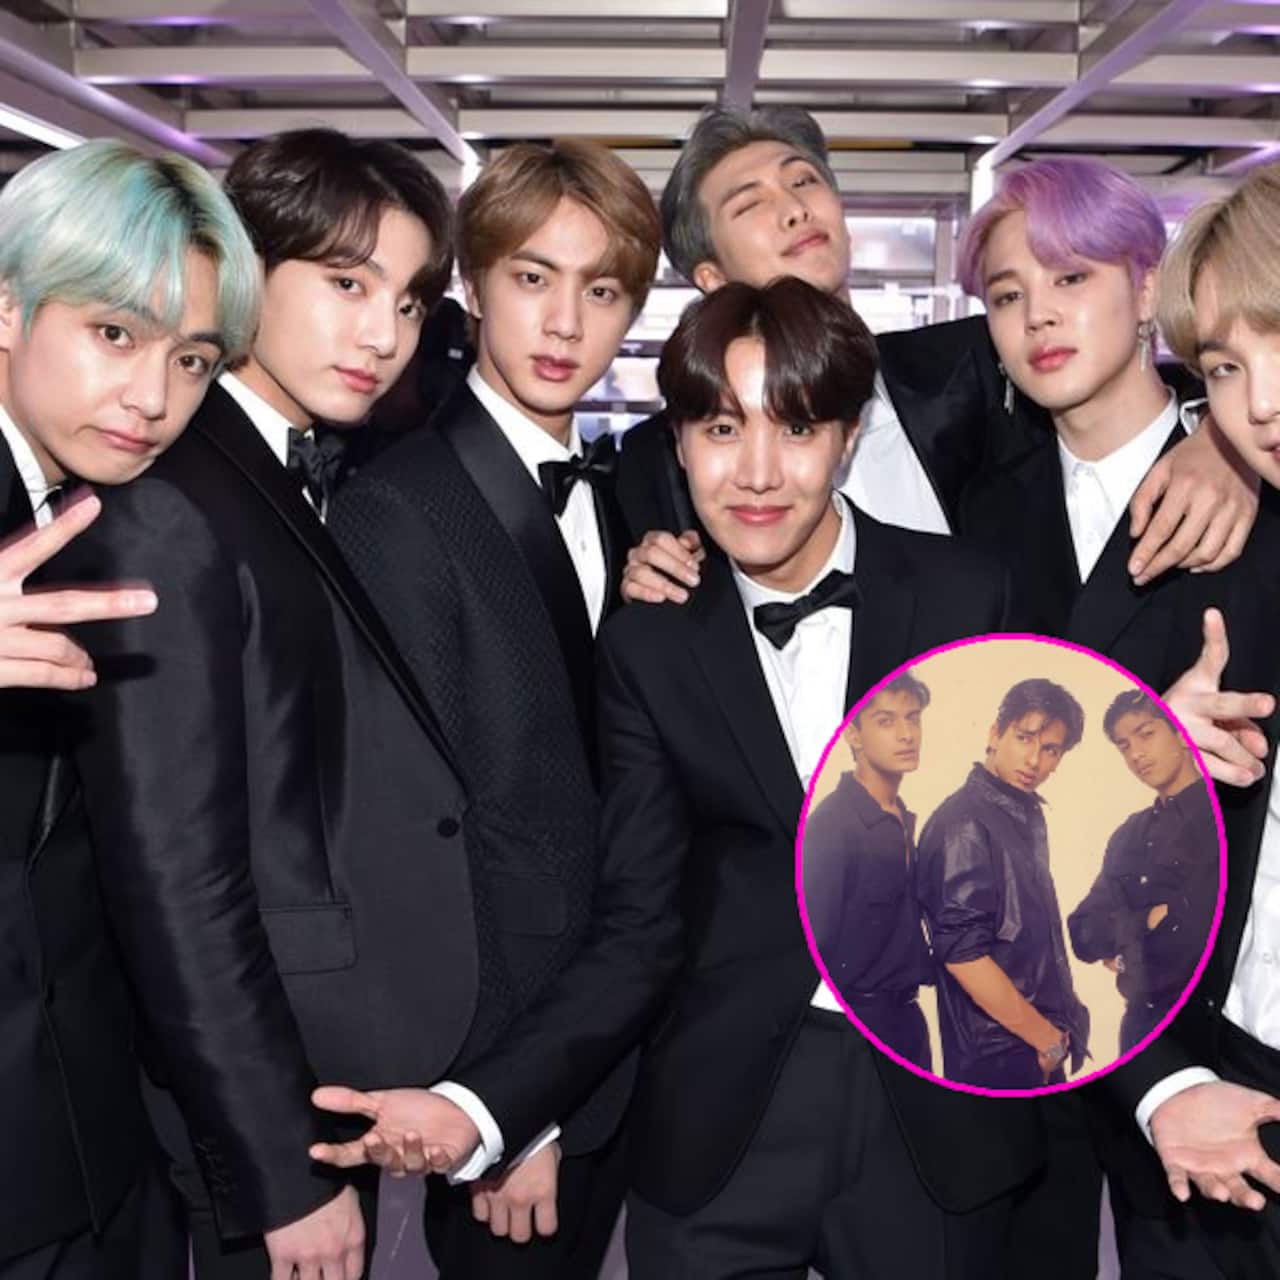 India's own BTS boy band? This throwback picture of Shahid Kapoor and others make fans draw comparisons with the Bangtan Boys